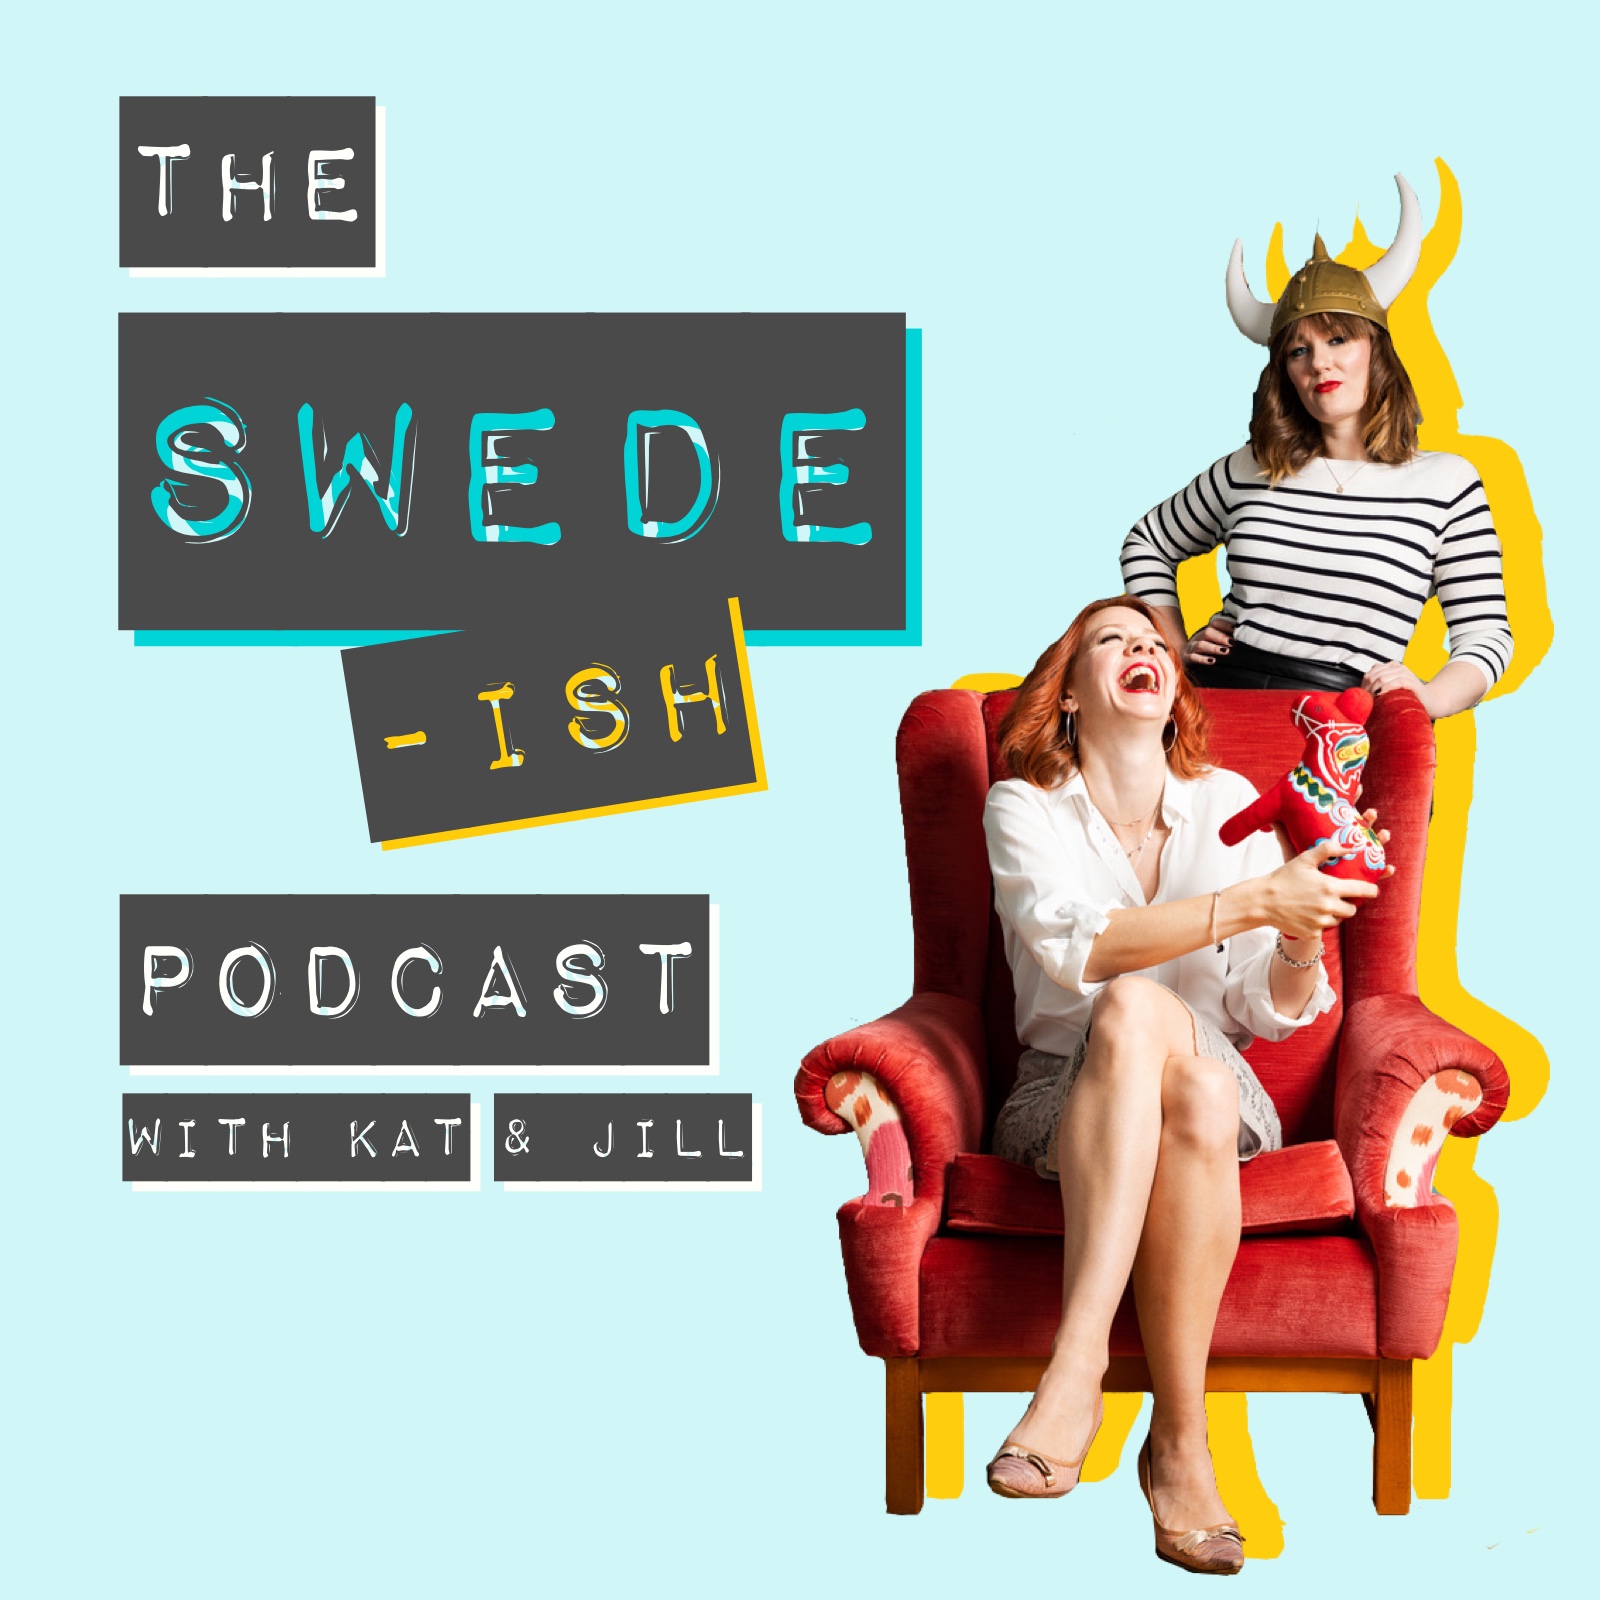 The Swede-ish Podcast